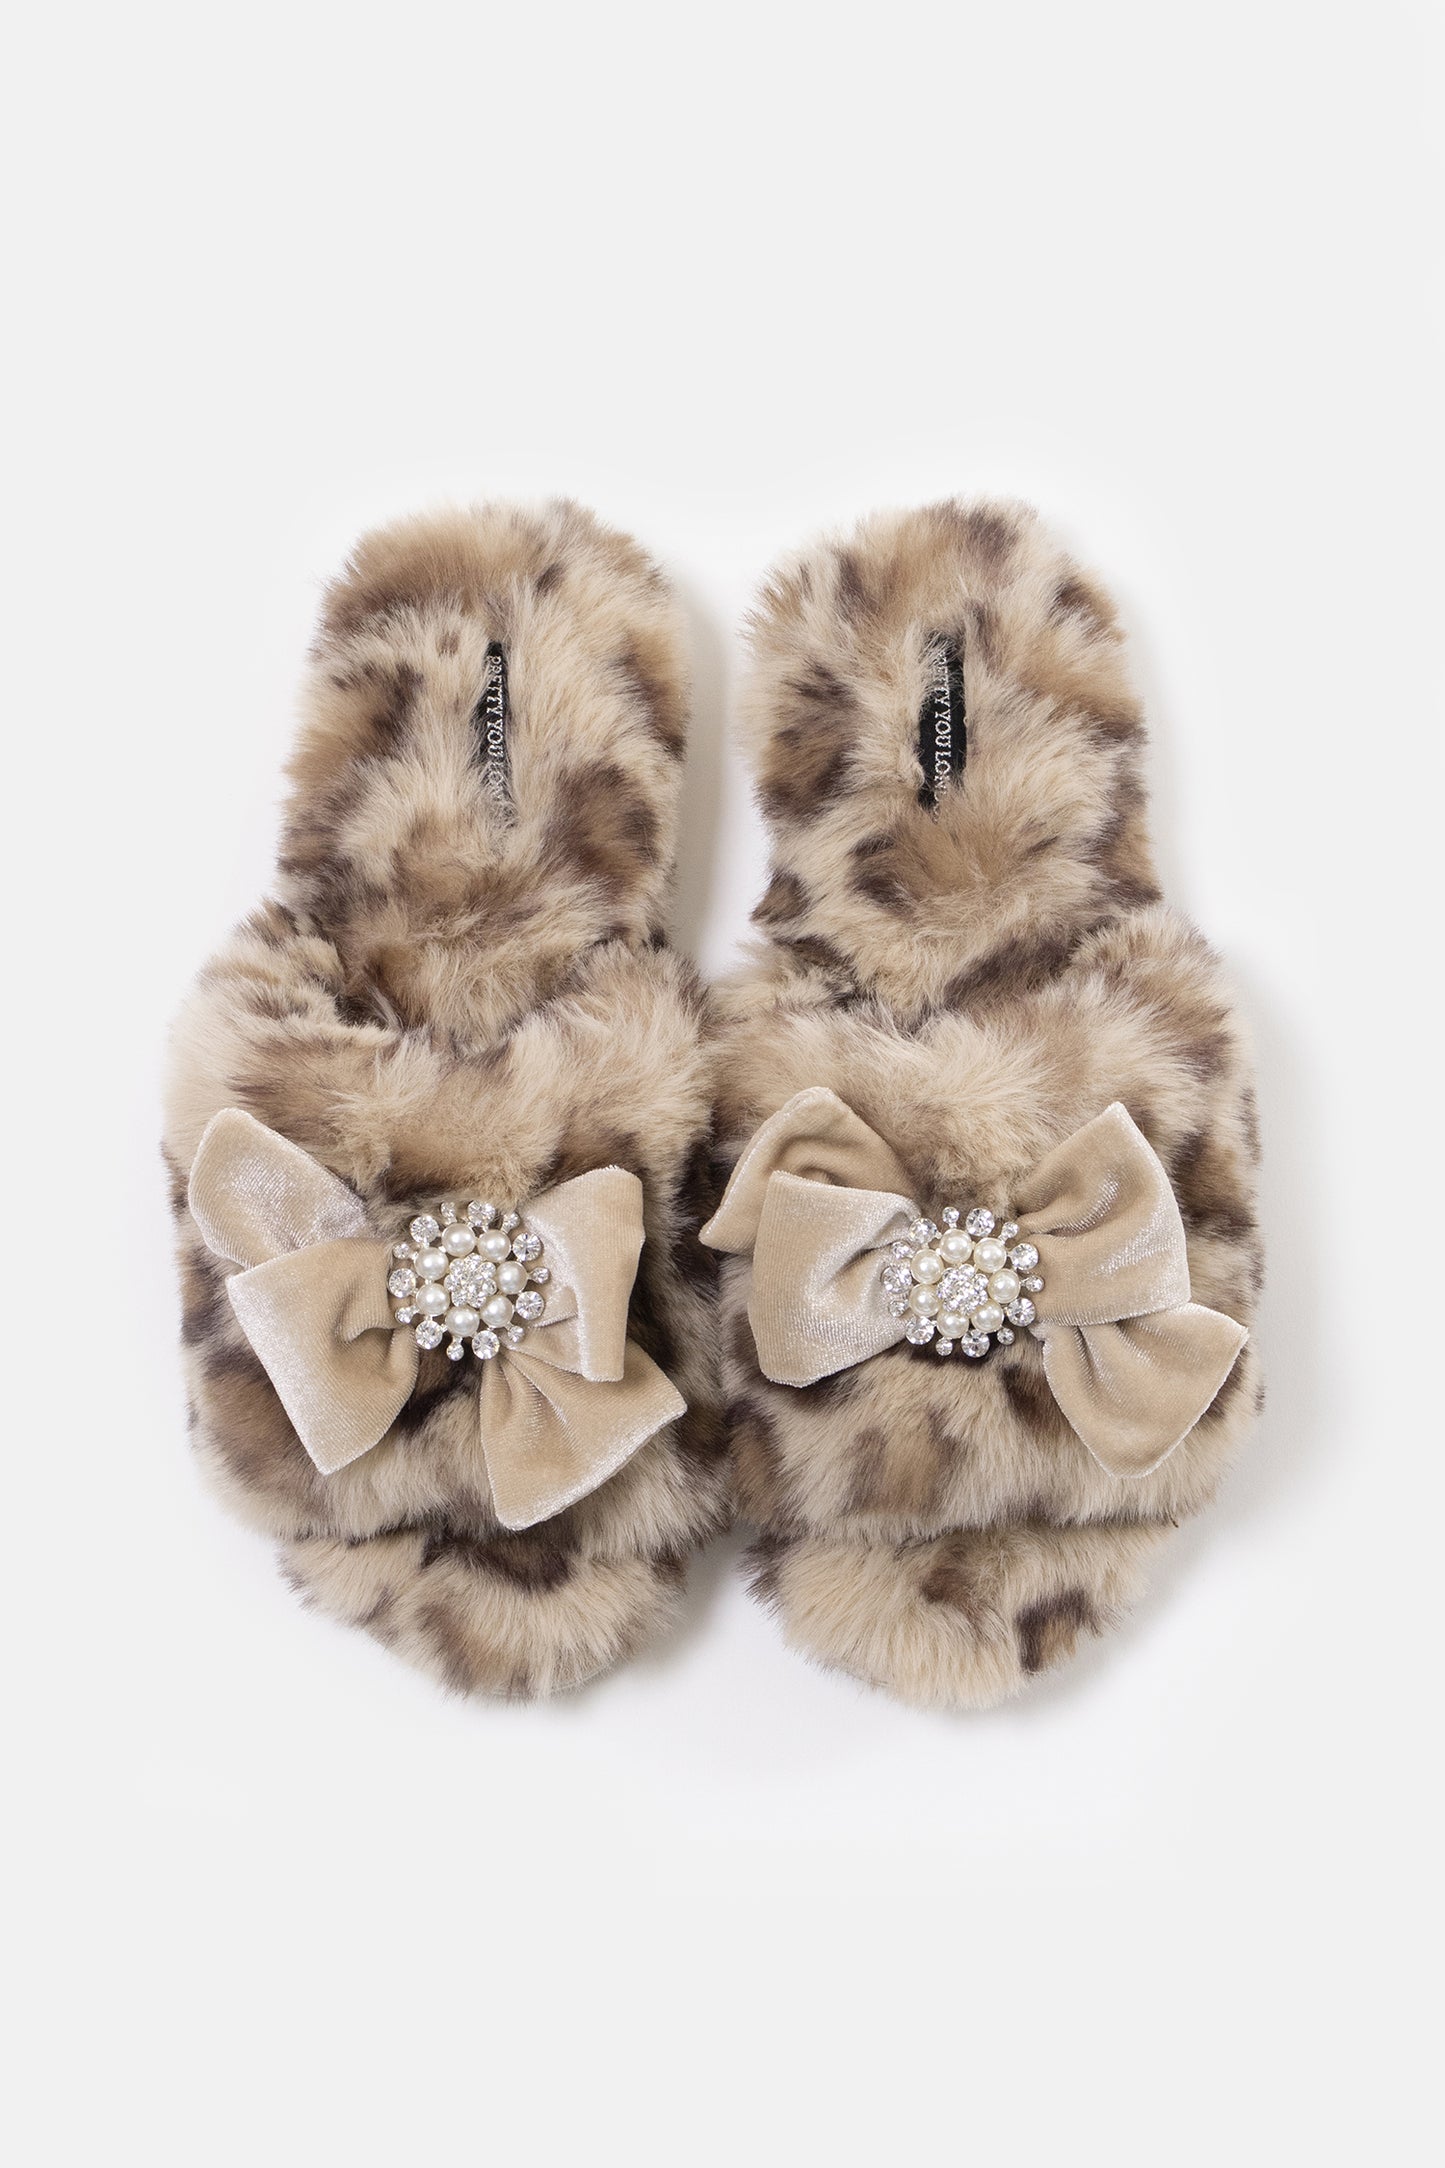 Anya women's slider slippers in leopard using the softest faux furs and topped with a premium grosgrain bow finished with a jewel pearl embellishment from Pretty You London